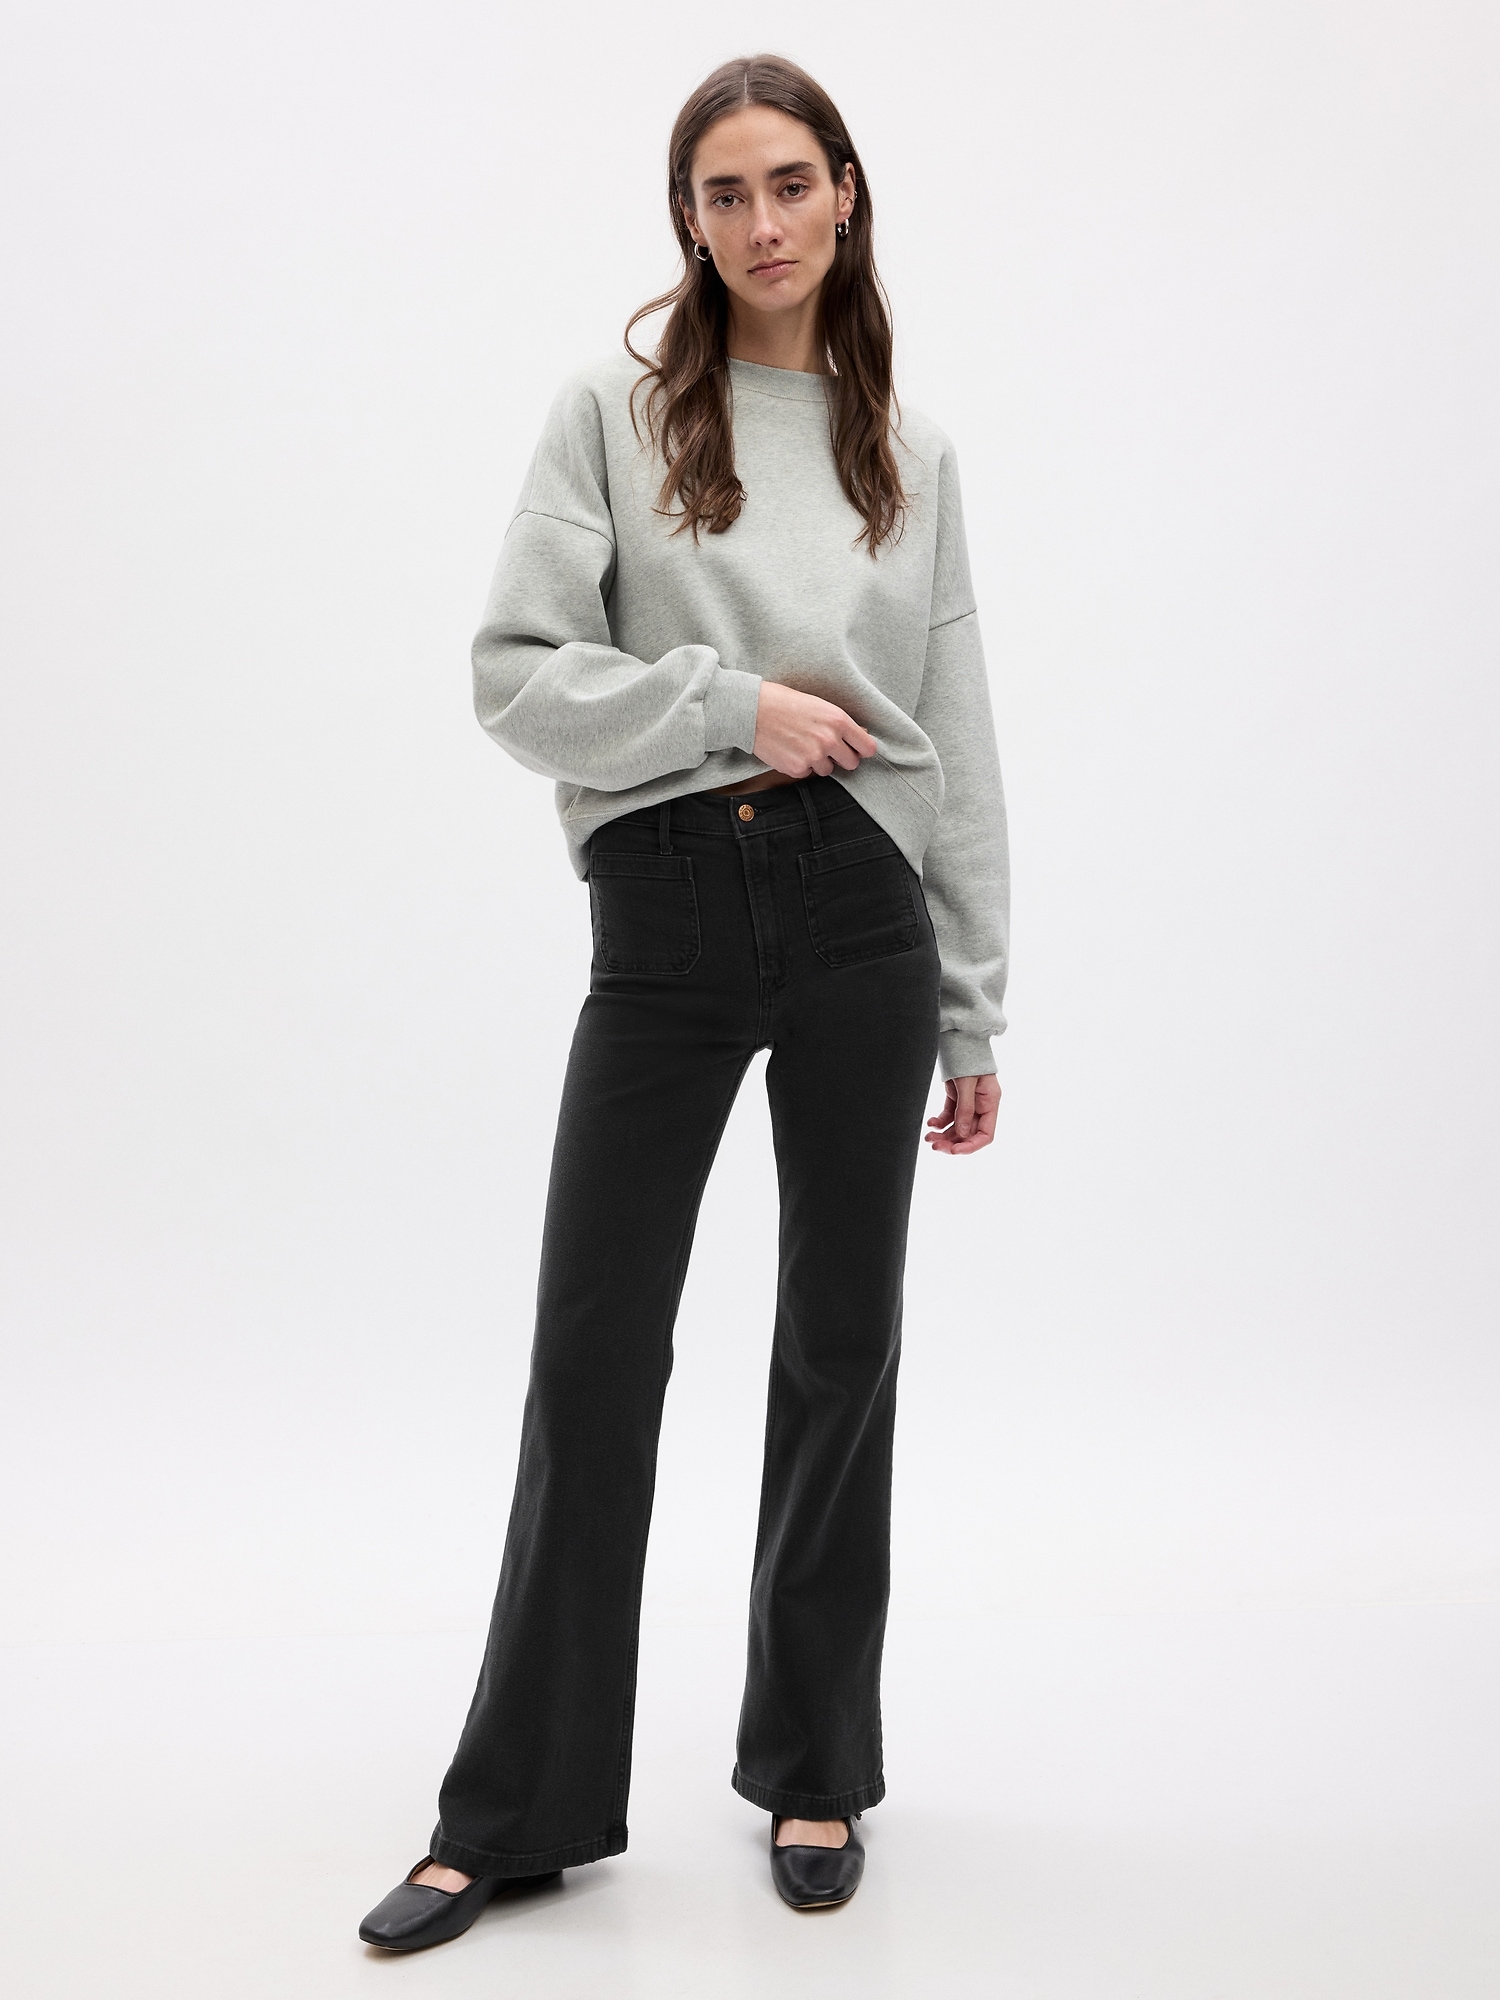 Bell Bottoms -All you need to know - Trends, accessories, pairings